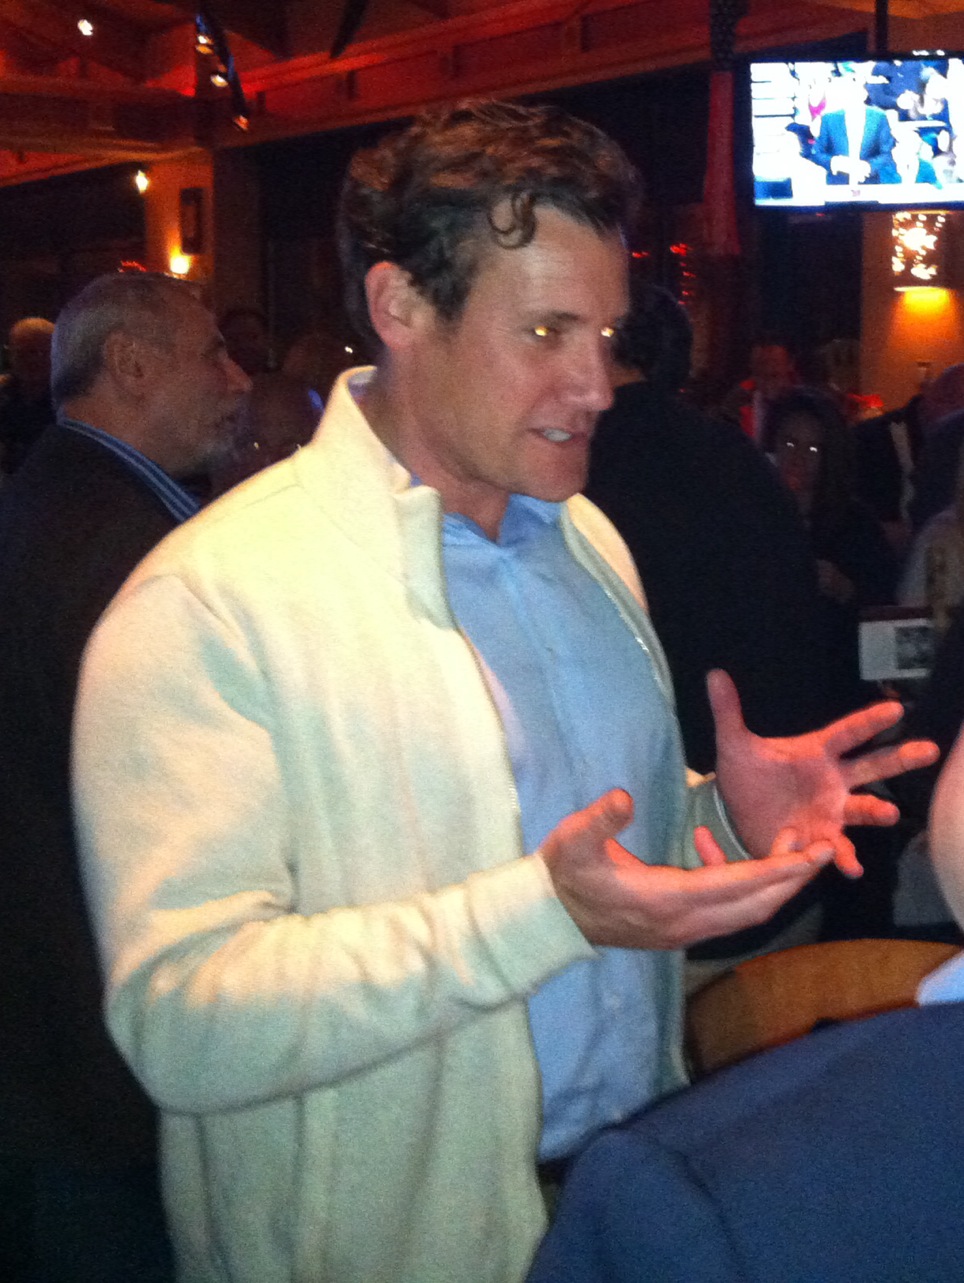 Vancouver Mayor Tim Leavitt talks with supporters at his election night party in Vancouver.